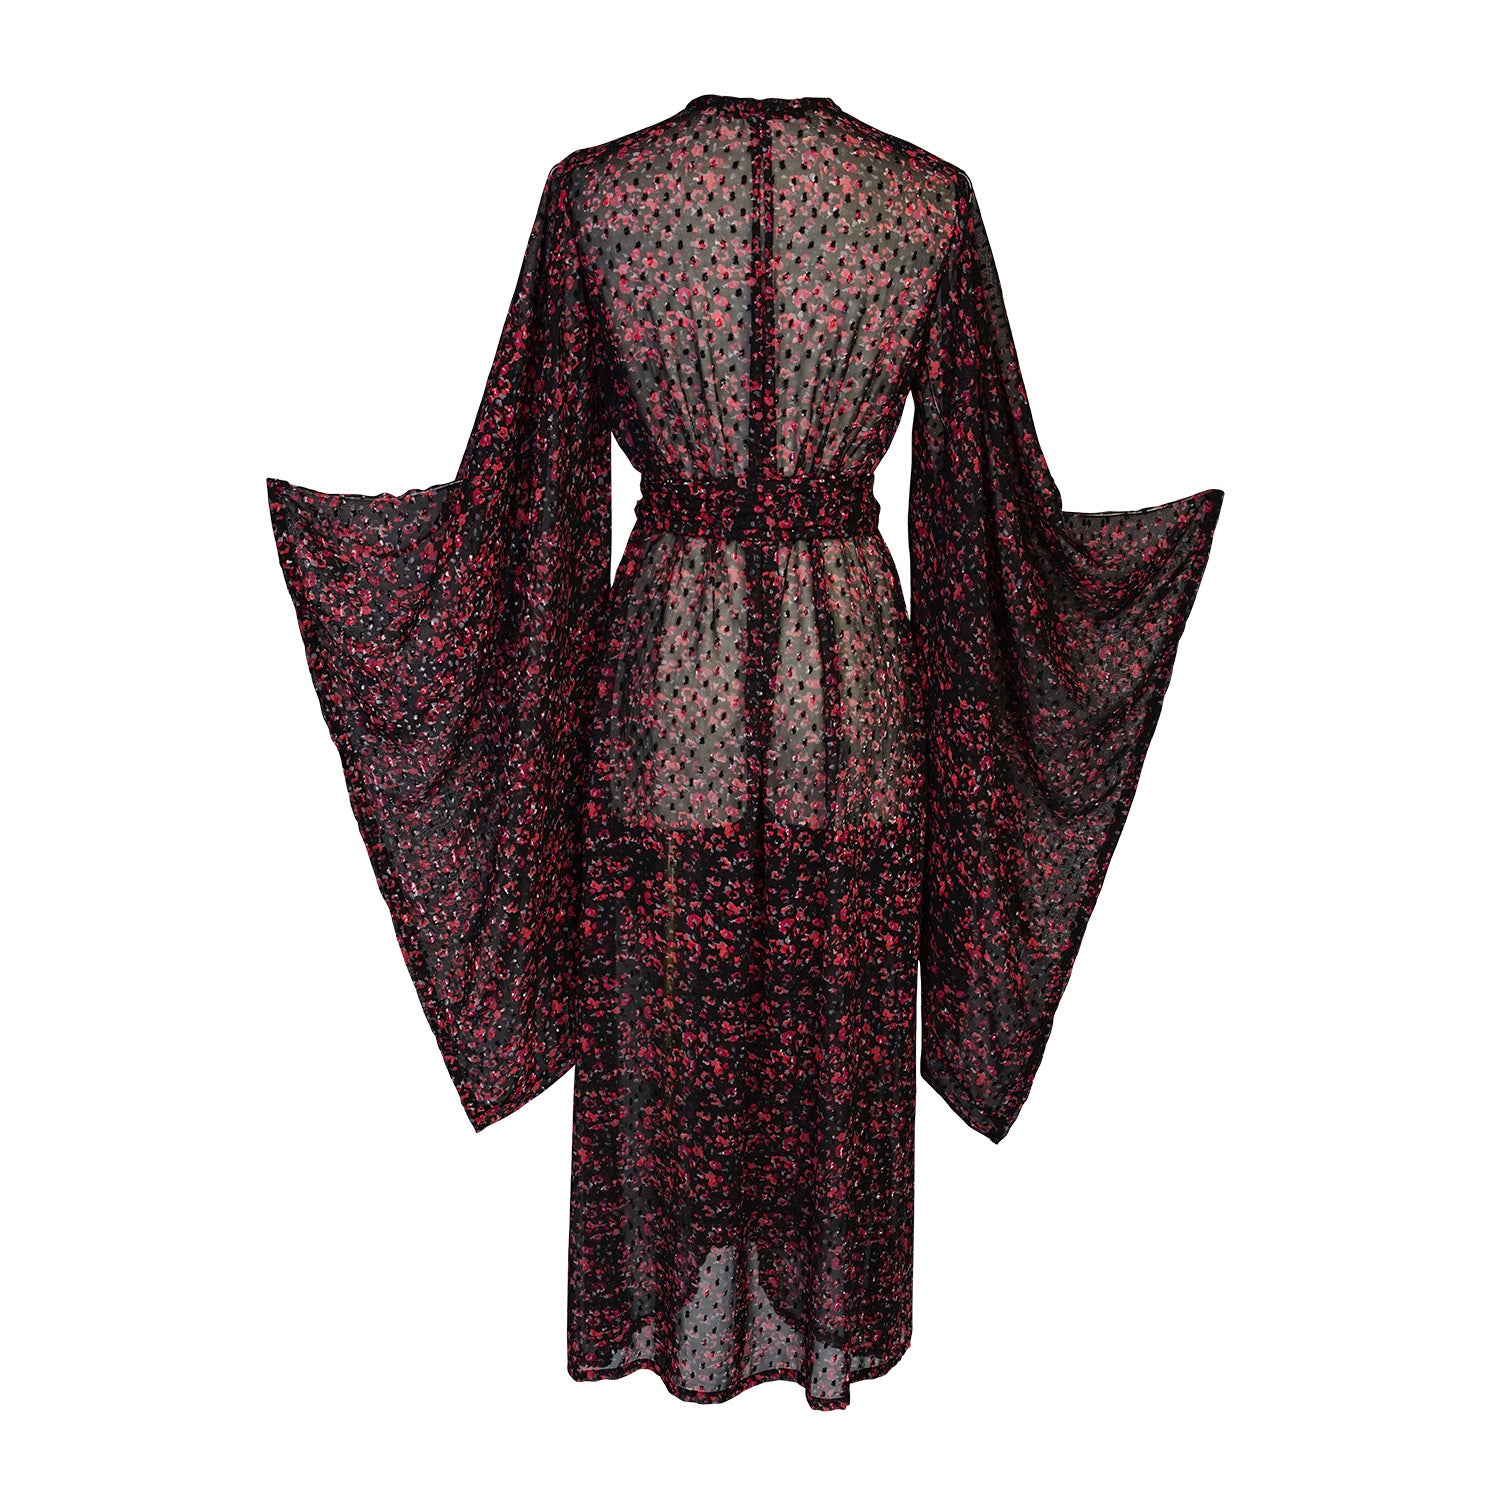 Dark red floral kimono robe with belt. Made from Swiss dot chiffon, its striking rouge floral pattern evokes a sense of mystery. Can be worn open as a robe or wrap dress. Long flowy sleeves with ankle hem.